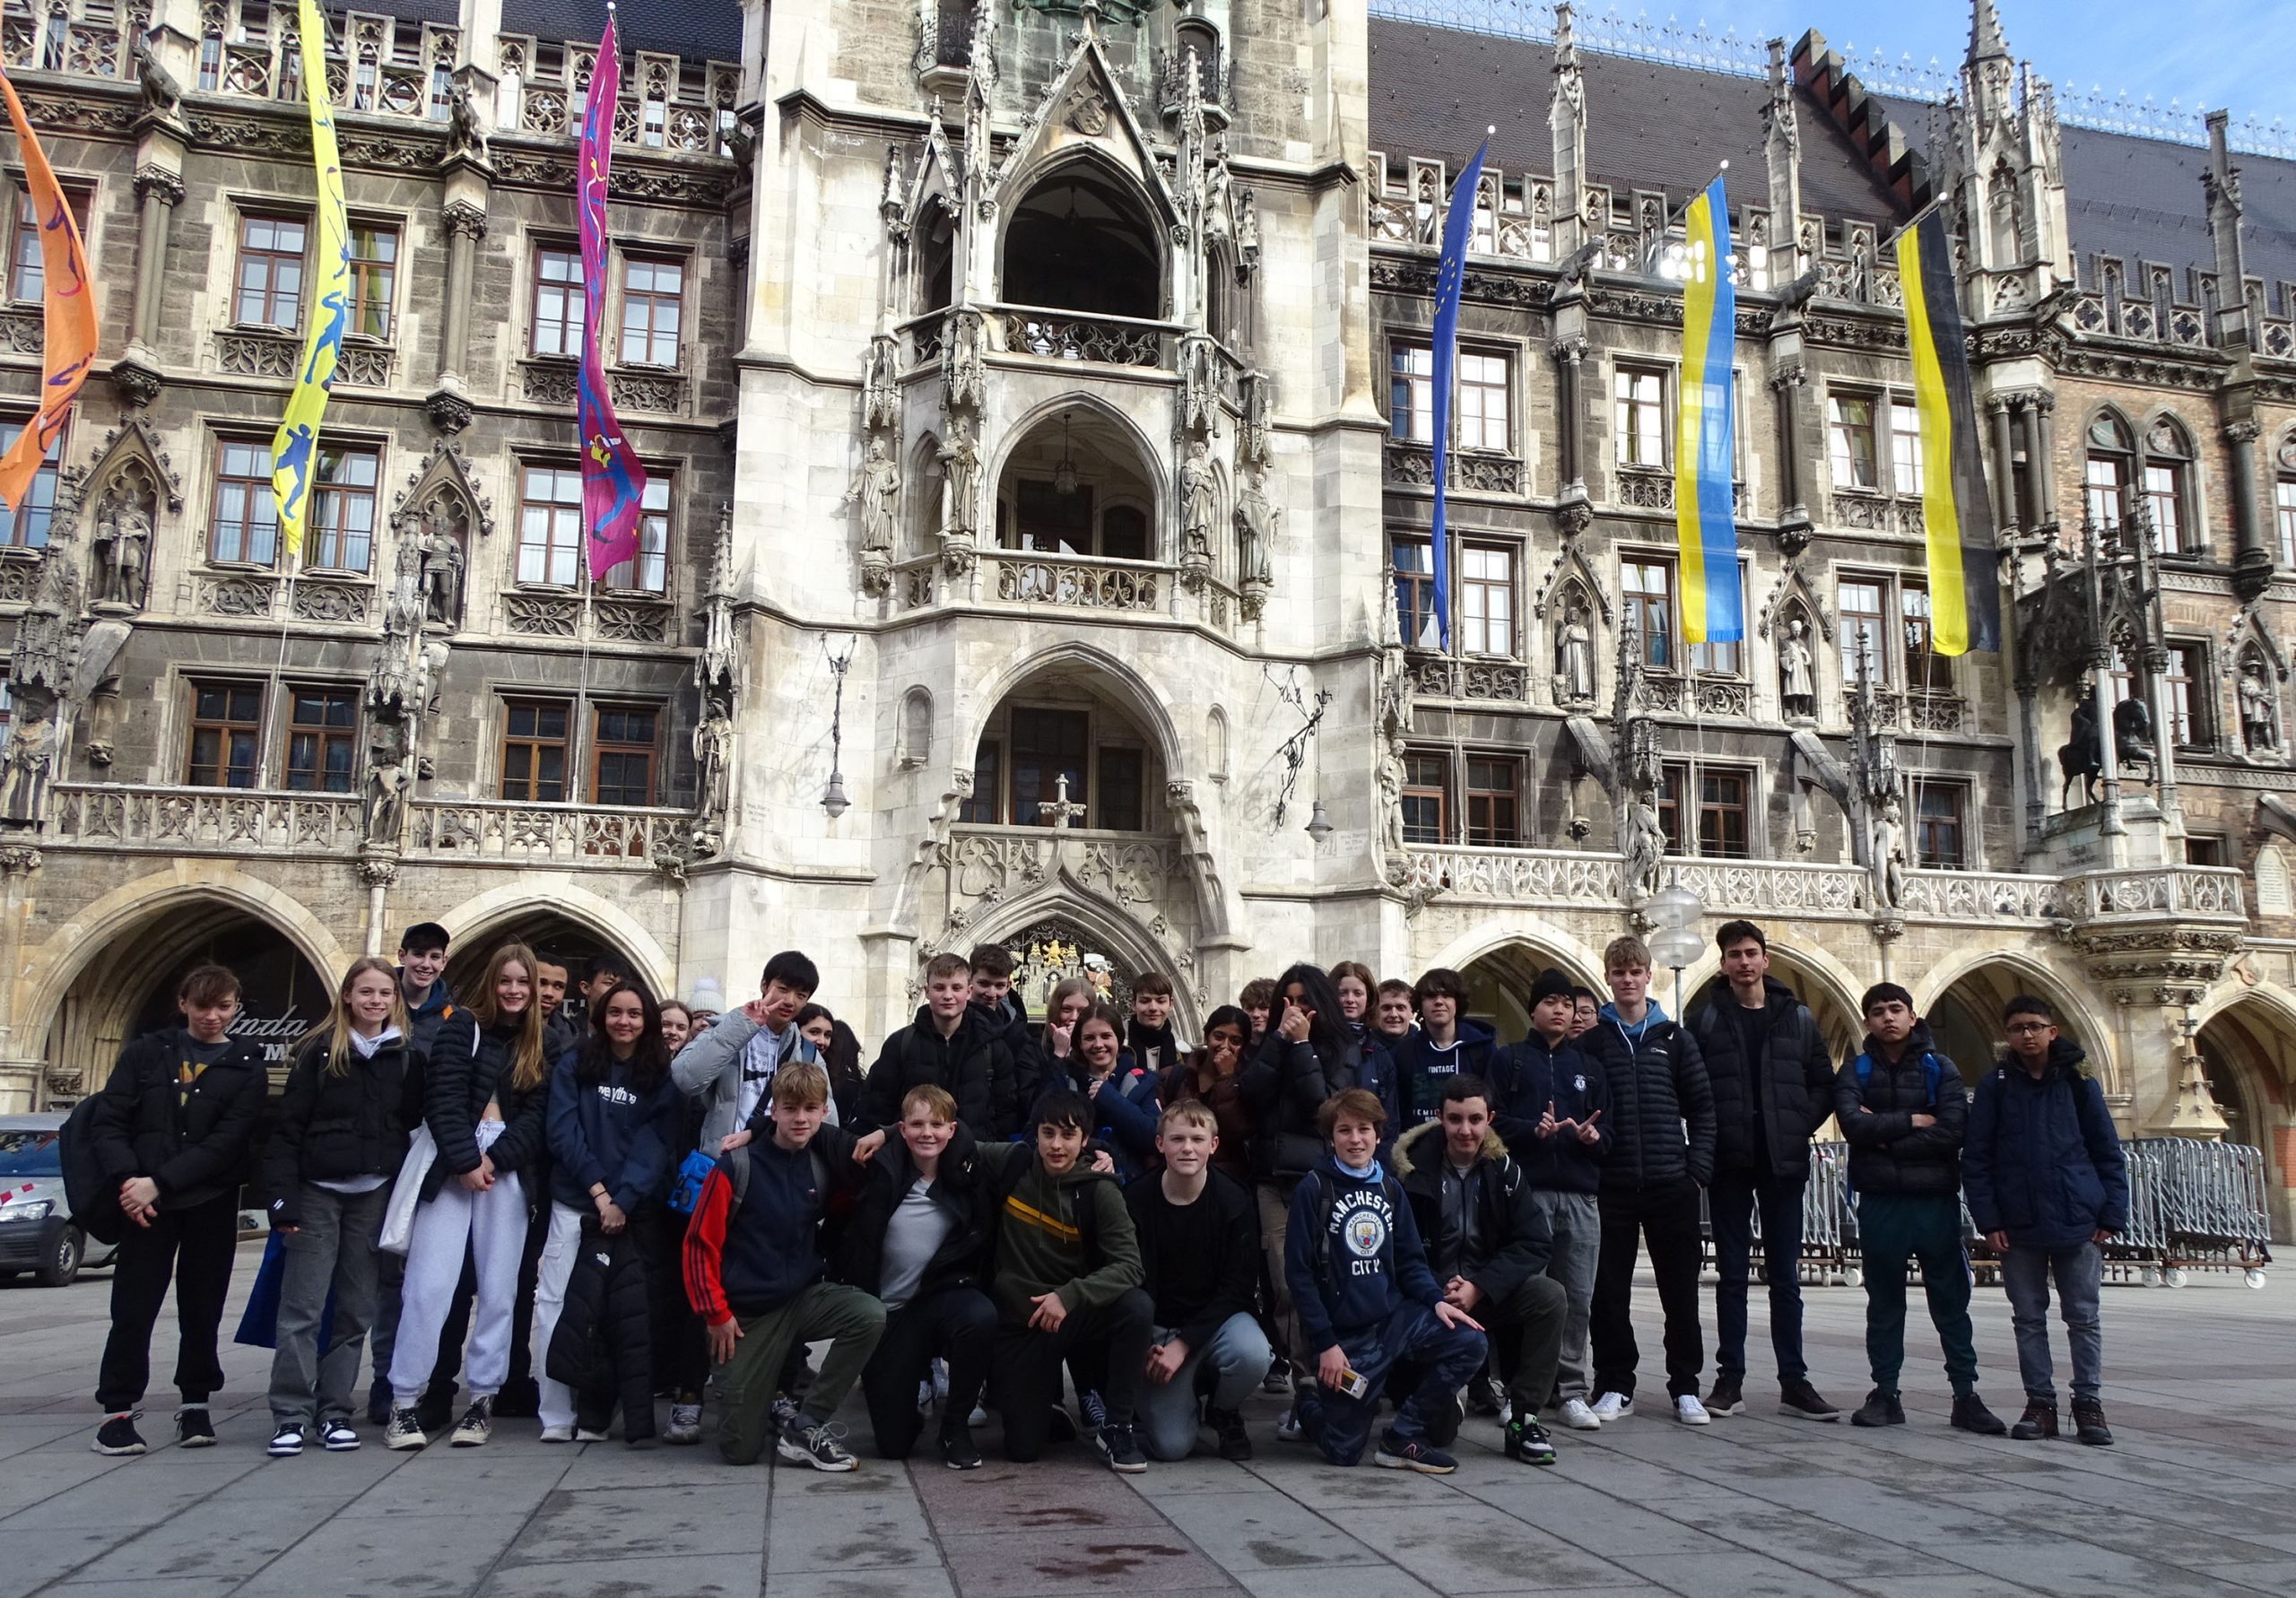 Pupils stopped in Munich’s main square, Marienplatz, during their trip to the German city